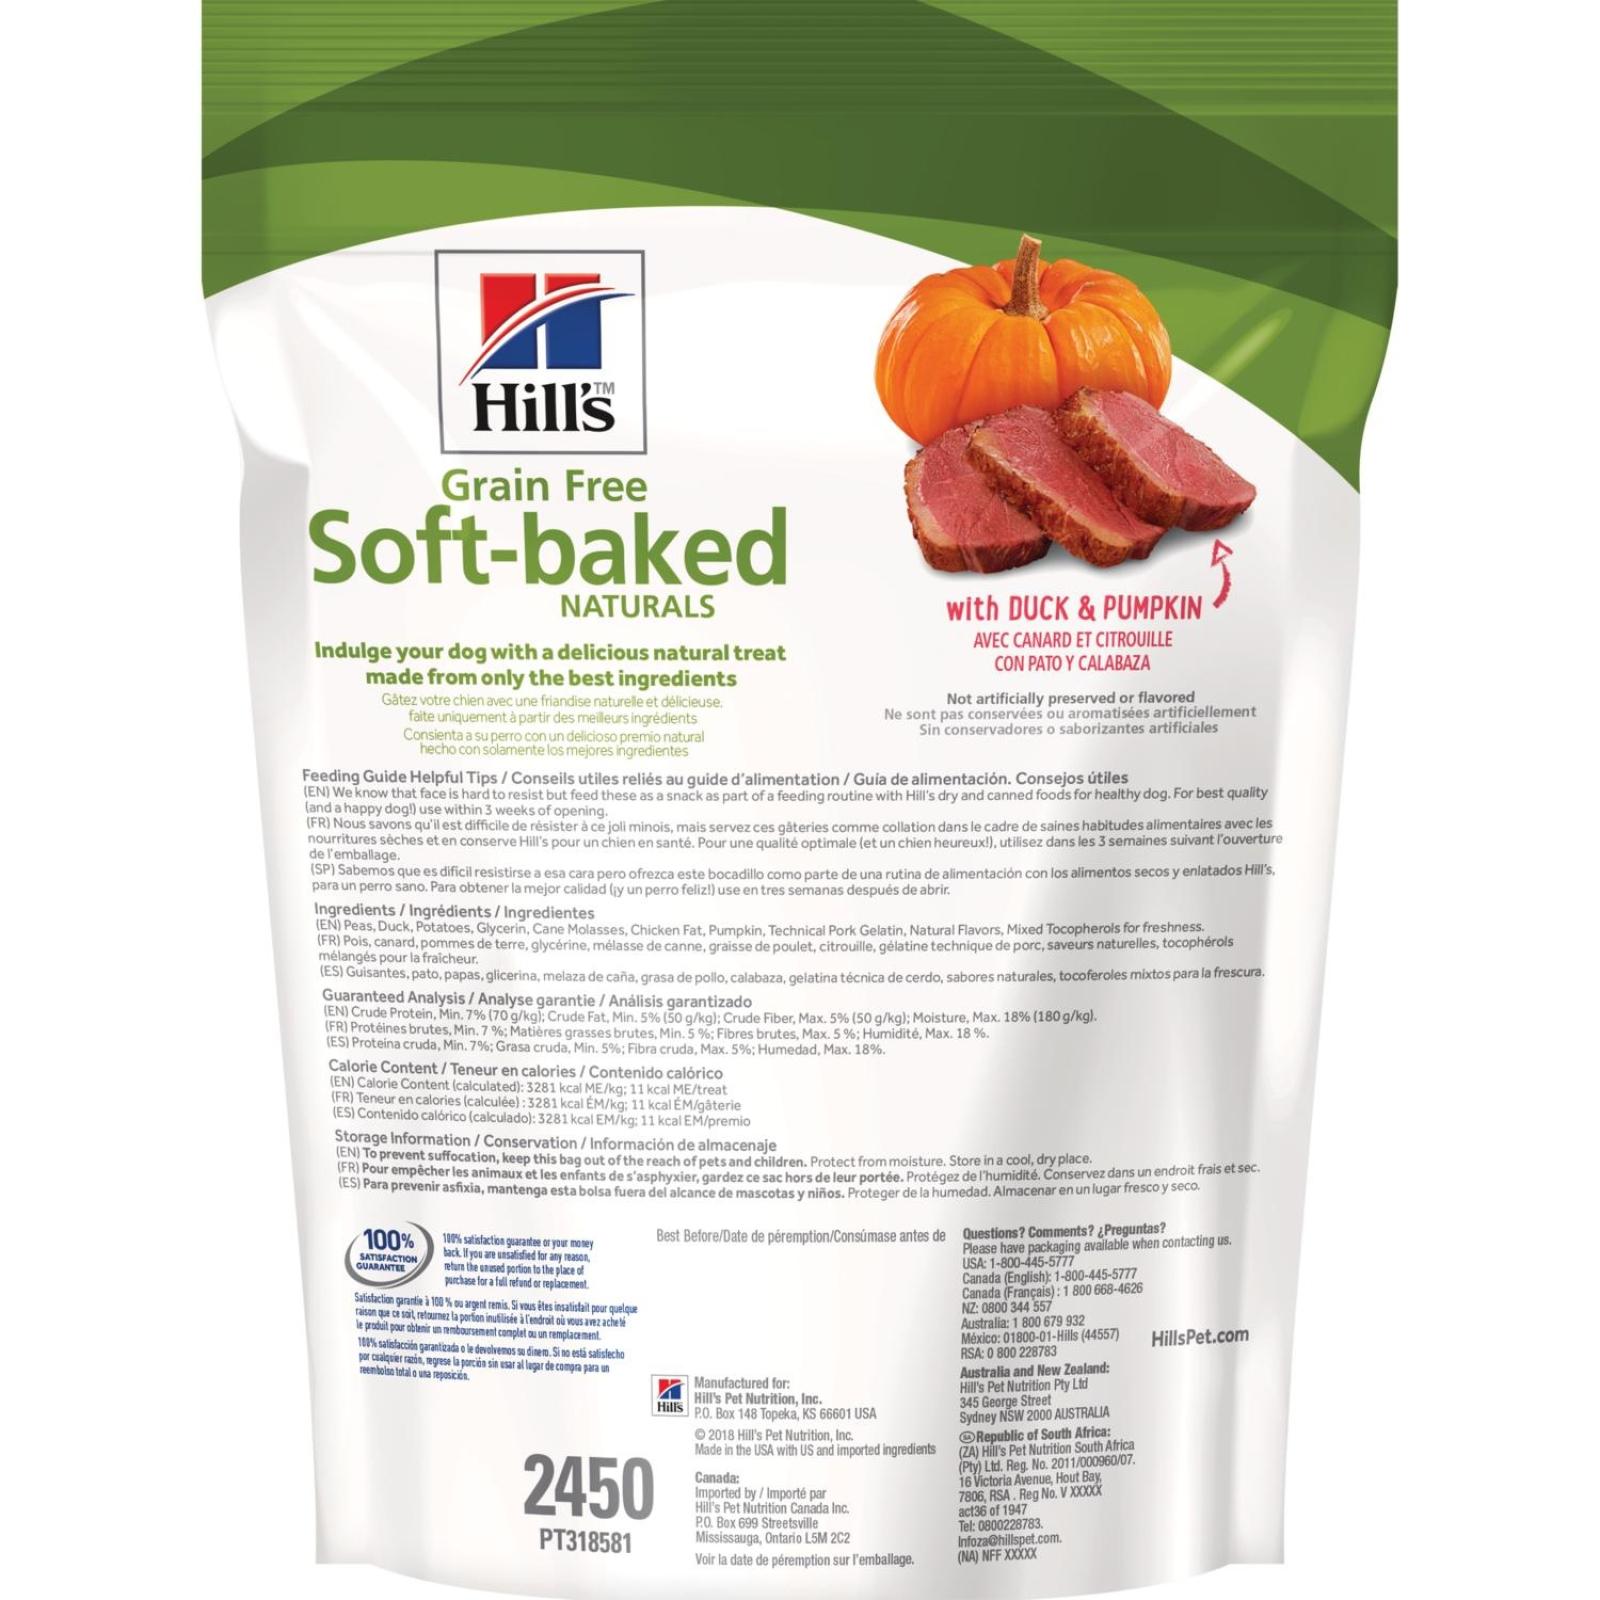 Hill's Science Diet Grain Free Soft-Baked Naturals with Duck & Pumpkin